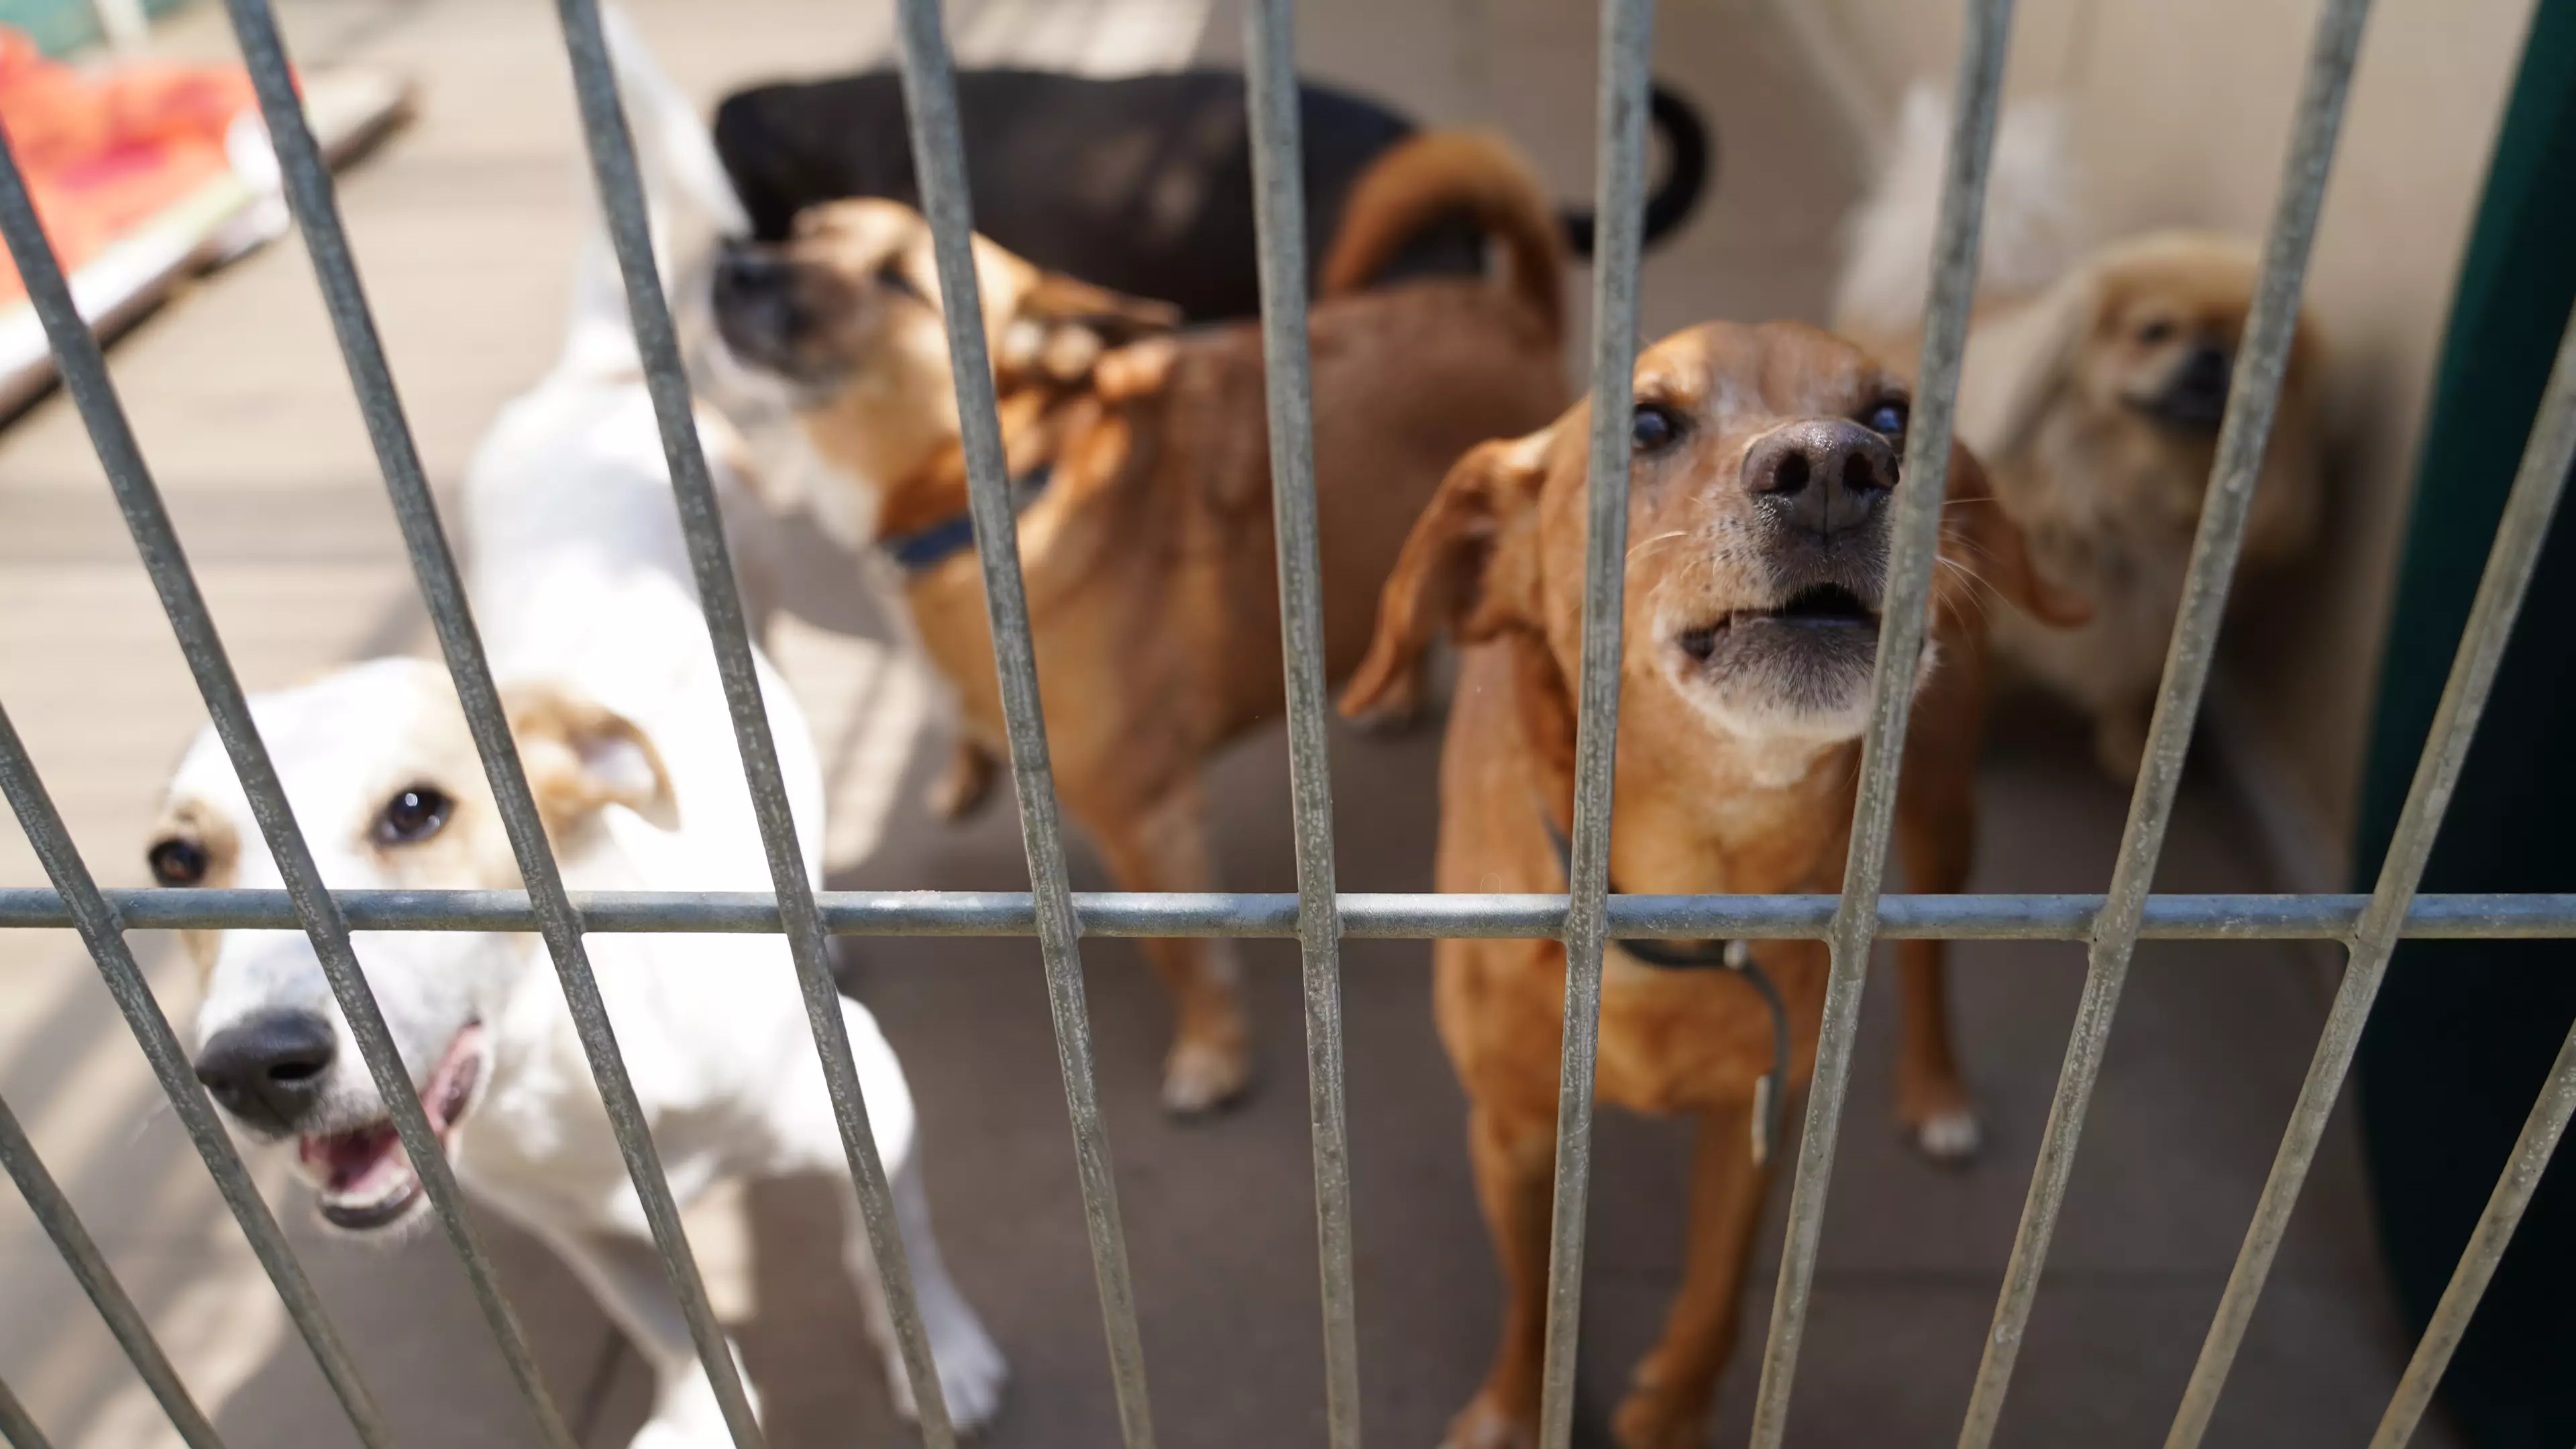 Animal Shelters Are Warning People About Adopting Pets In Lockdown